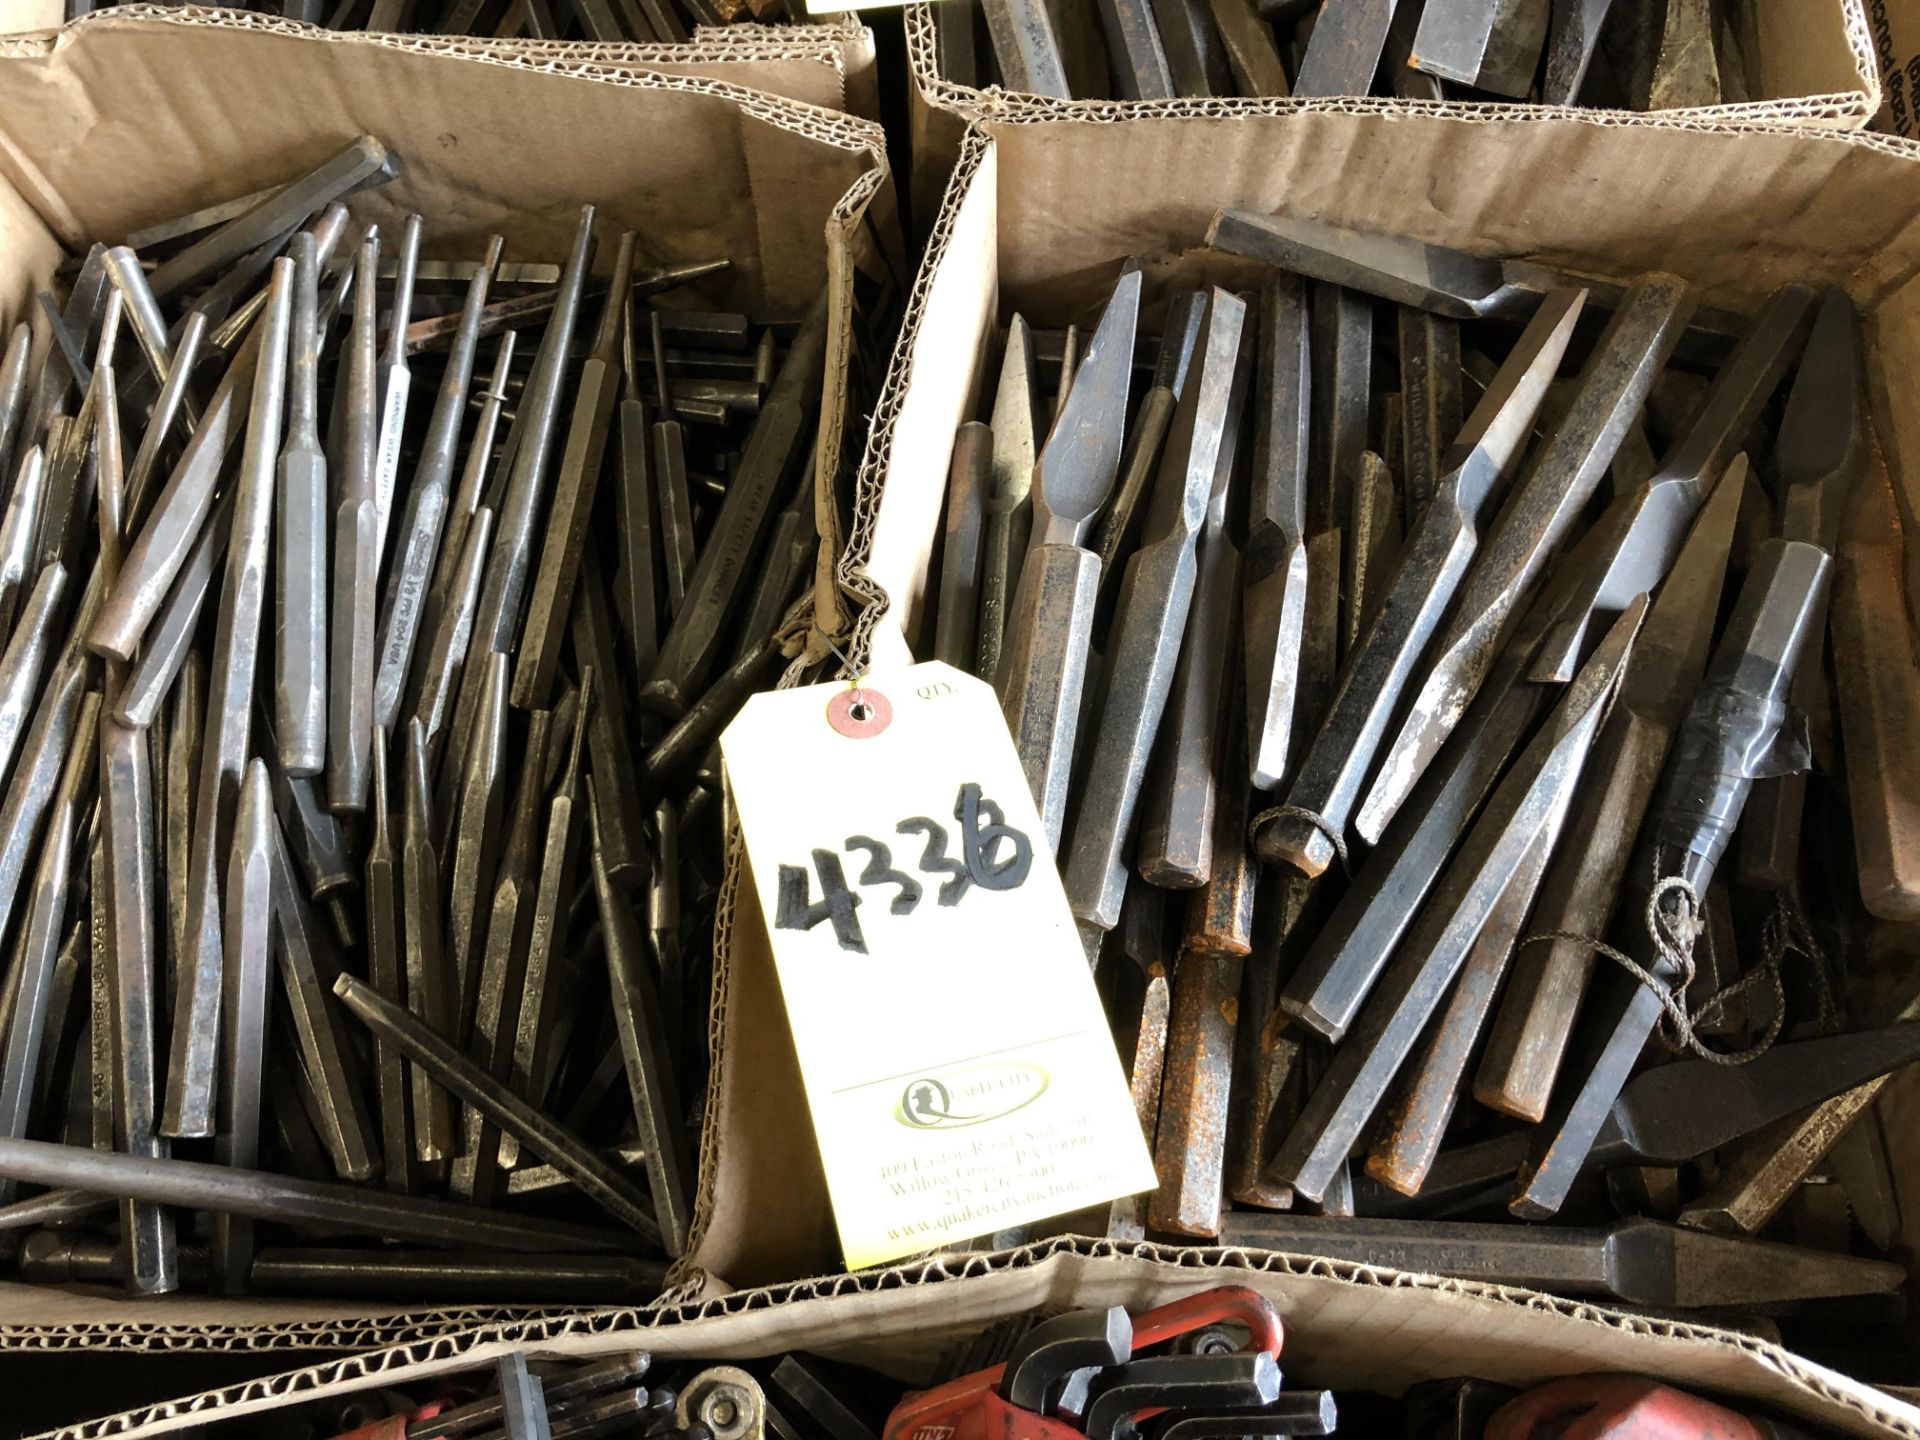 (2) BOXES OF CHISELS